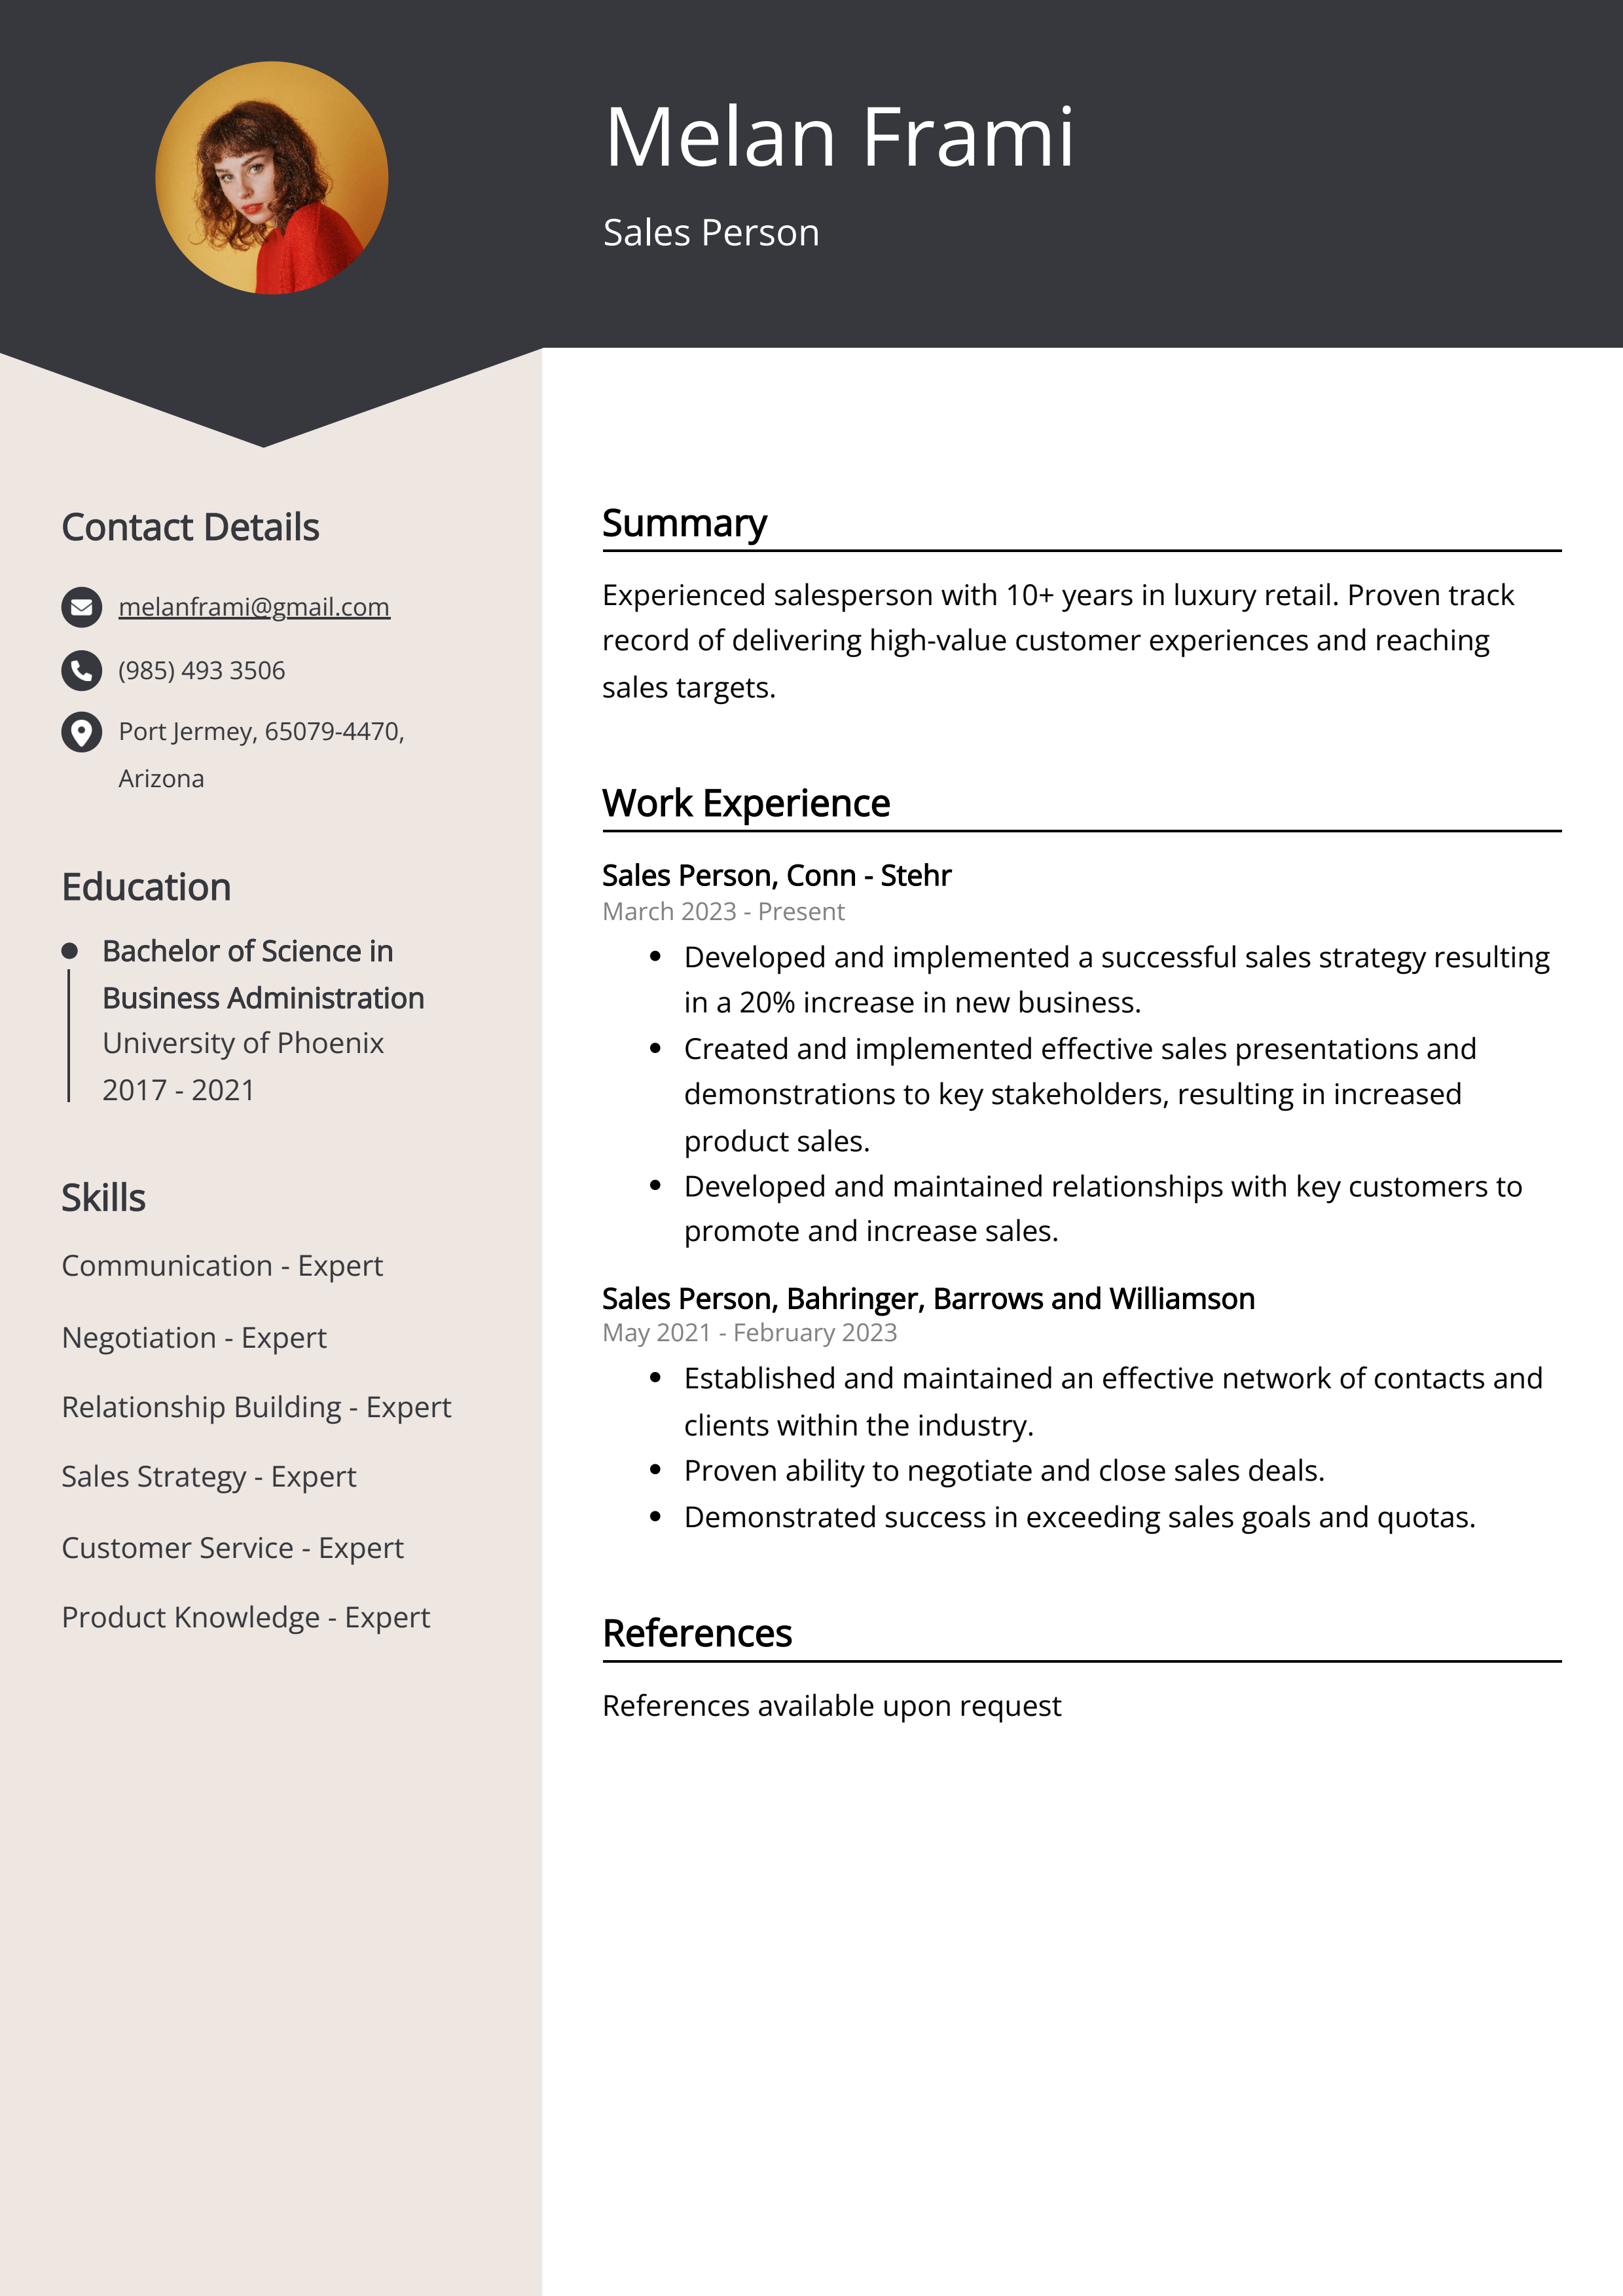 Sales Person Resume Example